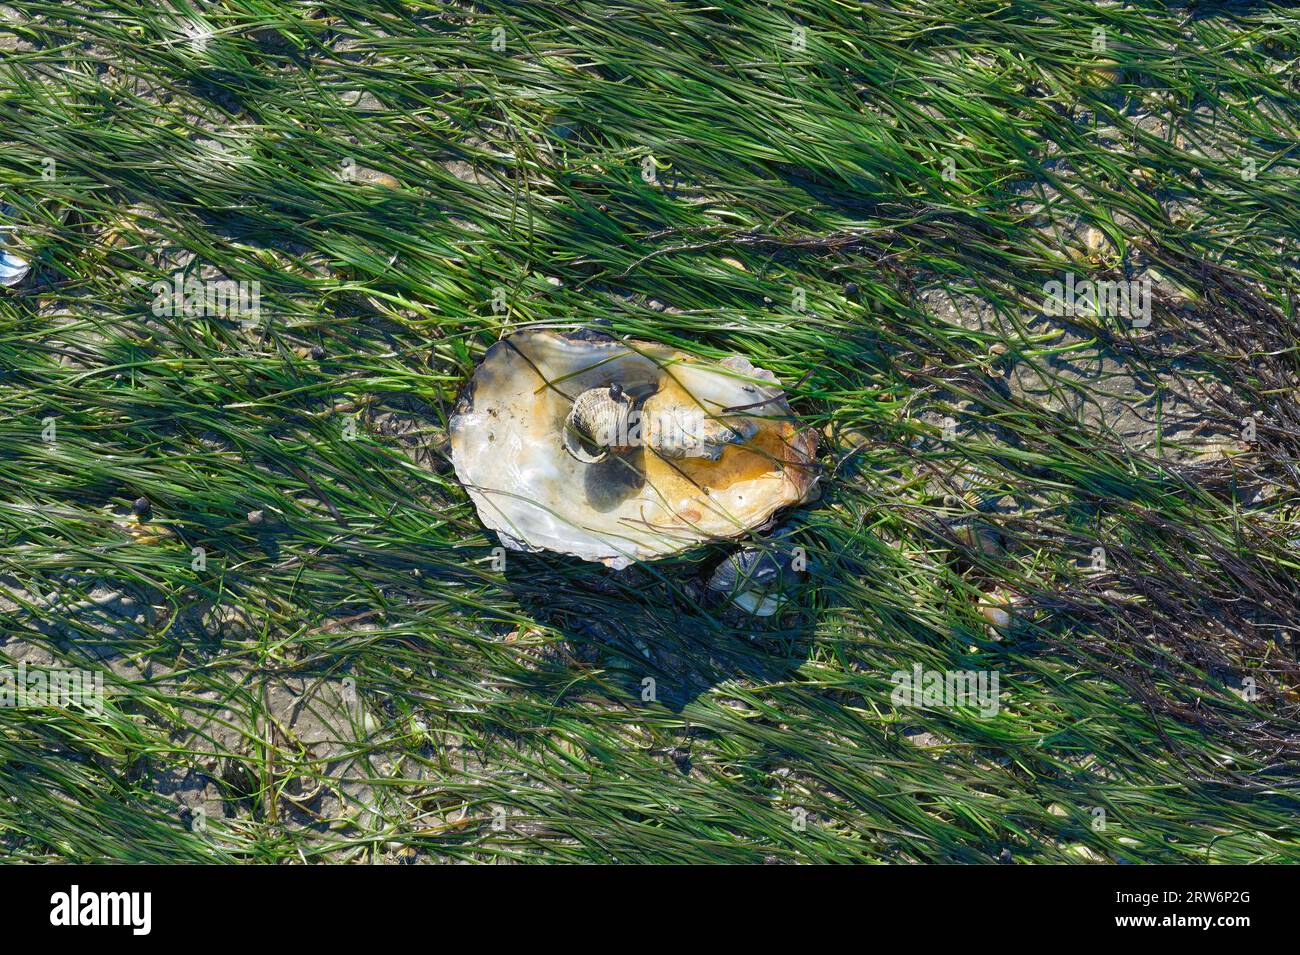 Oyster Shell on Seagrass (Zostera noltii),North Sea,Wattenmeer National Park,Germany Stock Photo